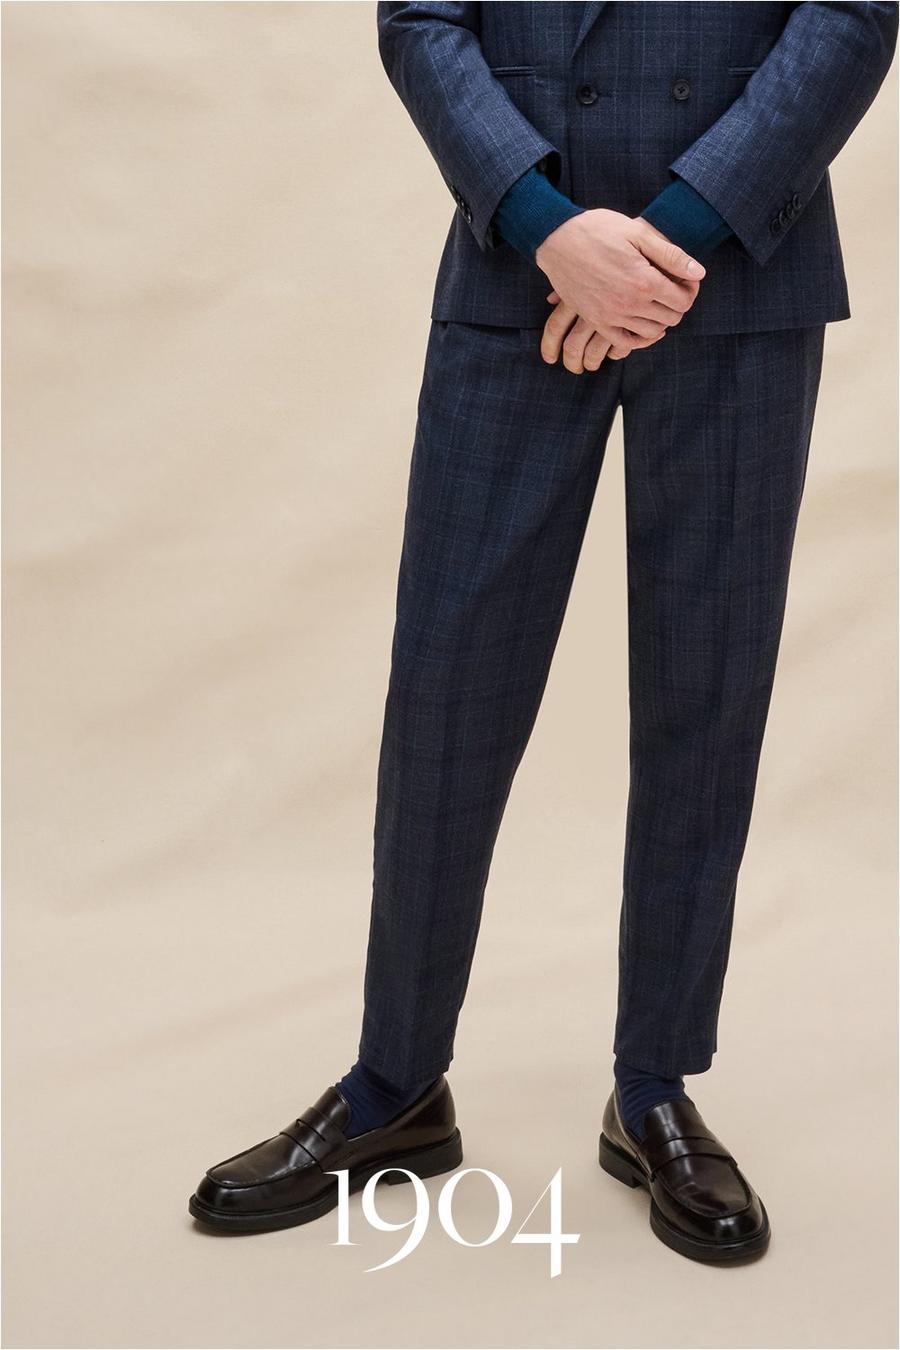 1904 Navy Tonal Check Tapered Suit Trouser